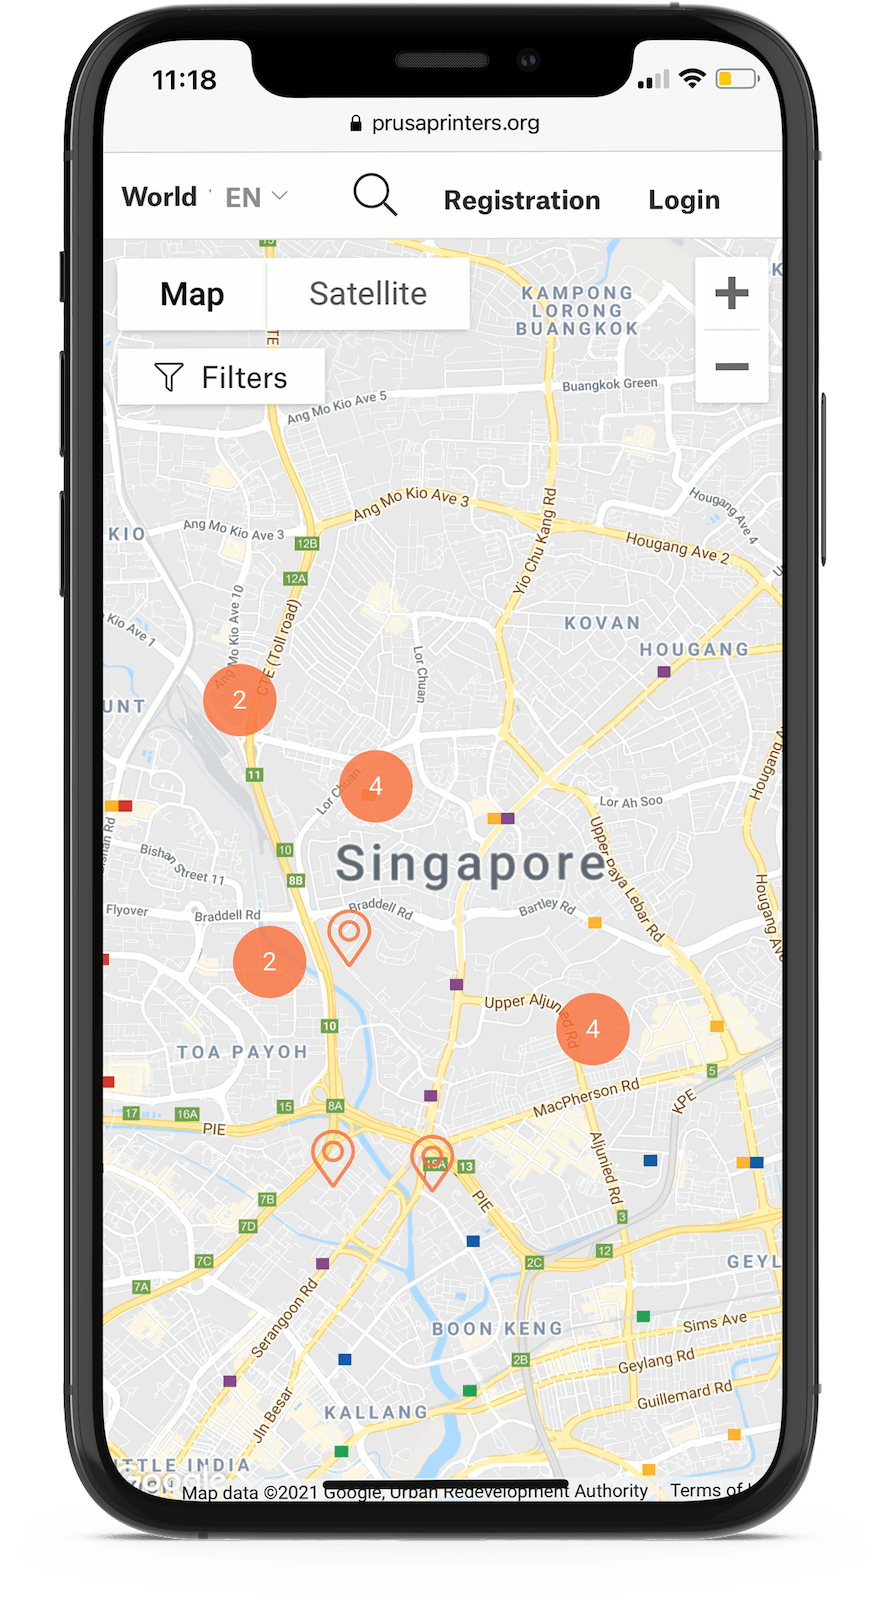 Map of Prusaprinters.org users in Singapore.